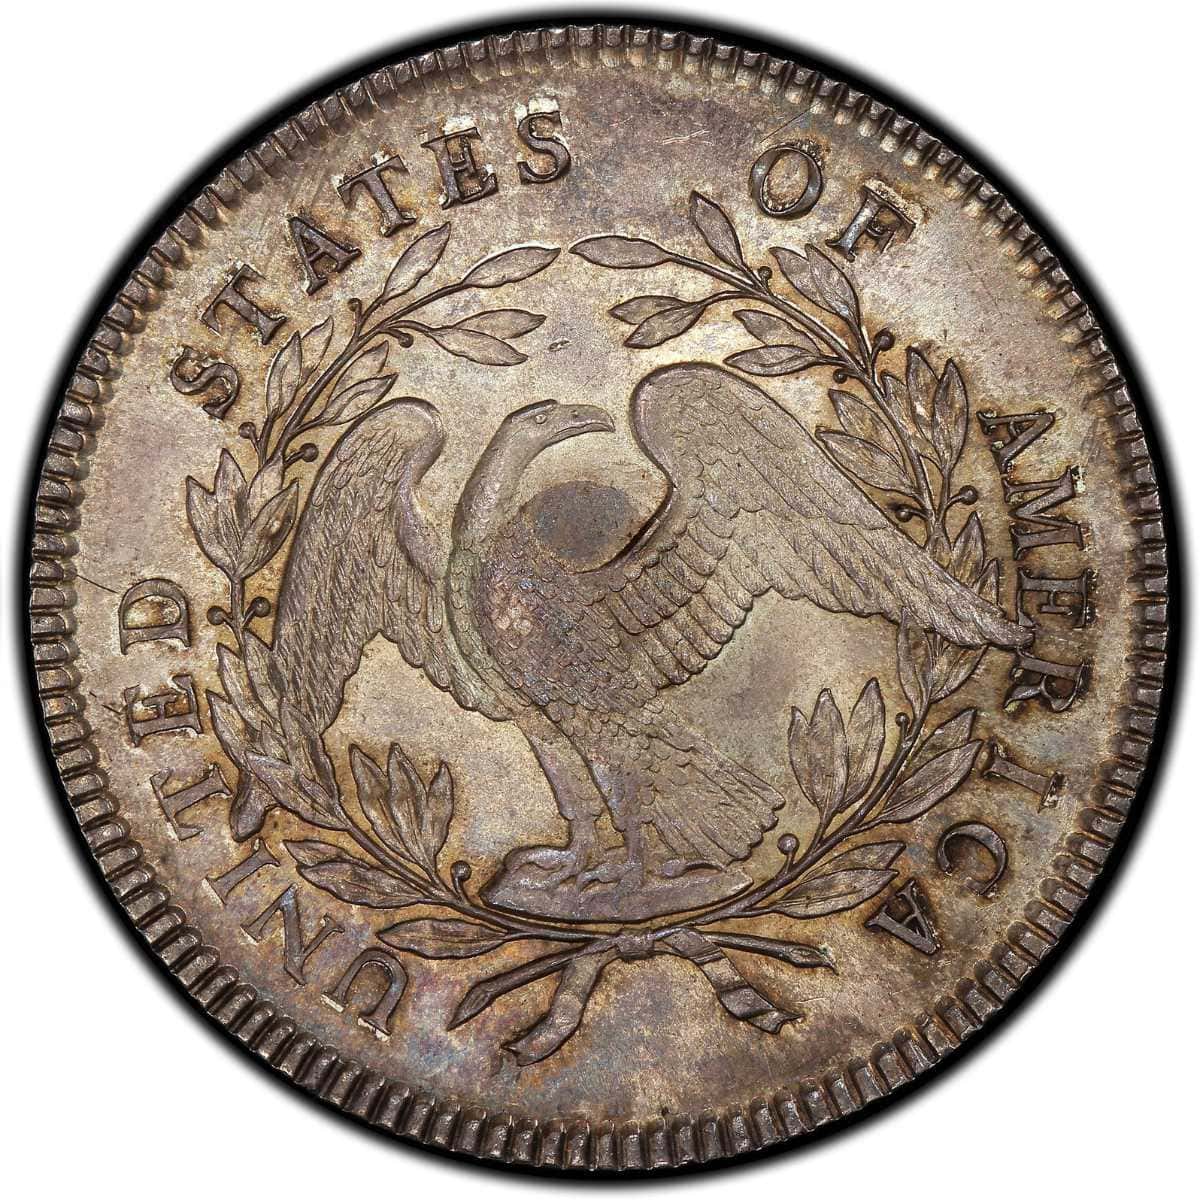 1795 Flowing Hair Silver Dollar Reverse Design and Features